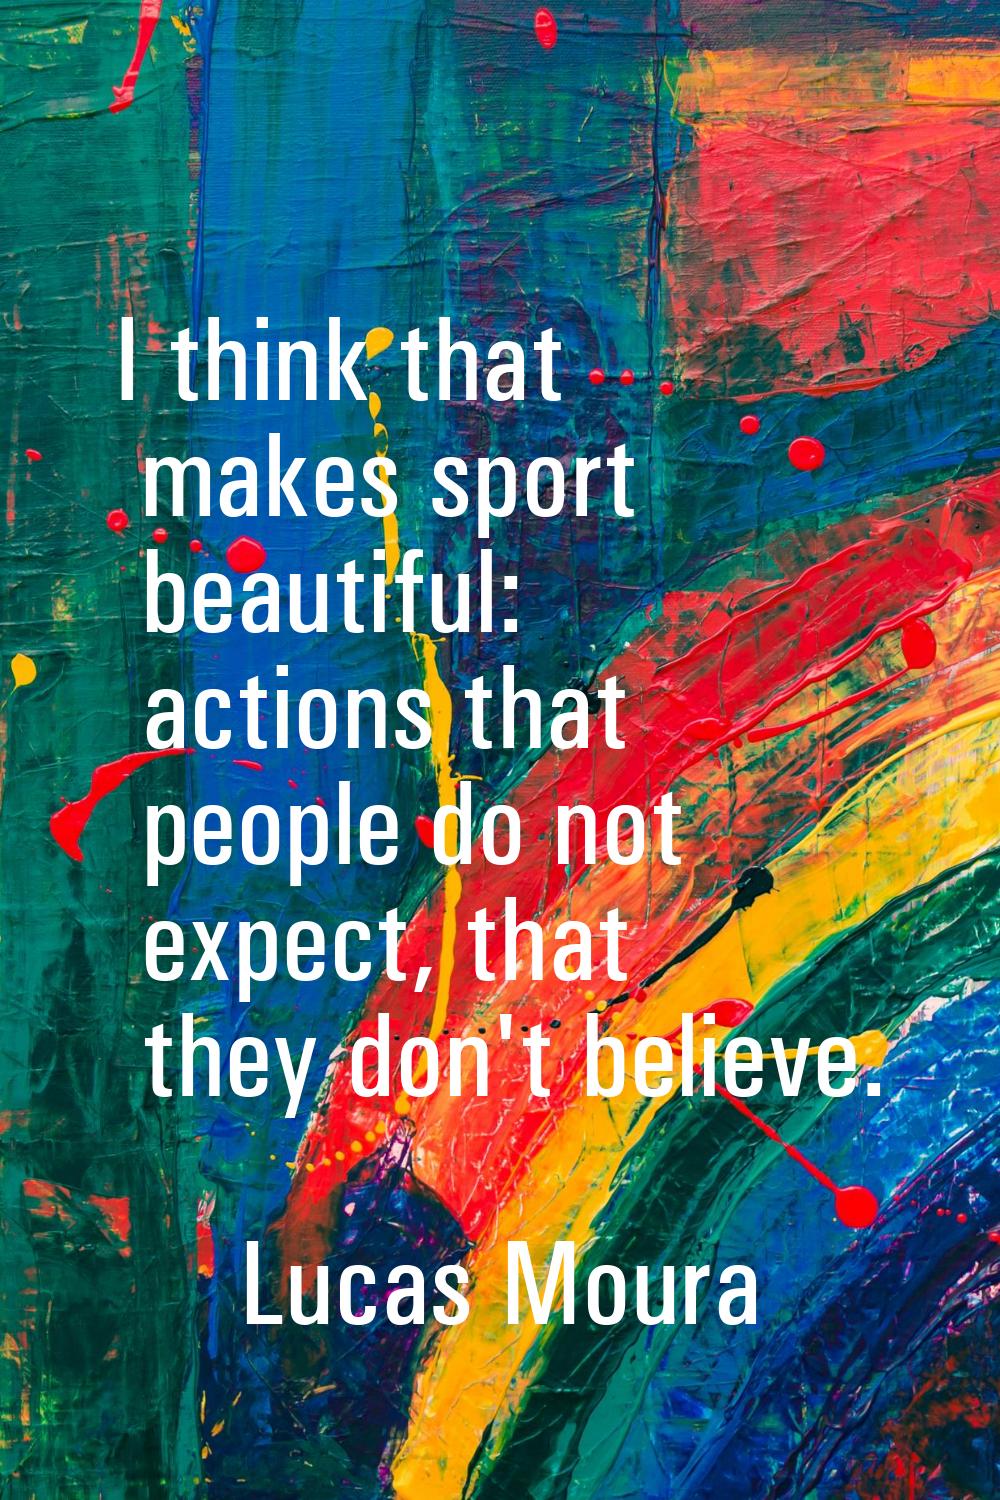 I think that makes sport beautiful: actions that people do not expect, that they don't believe.